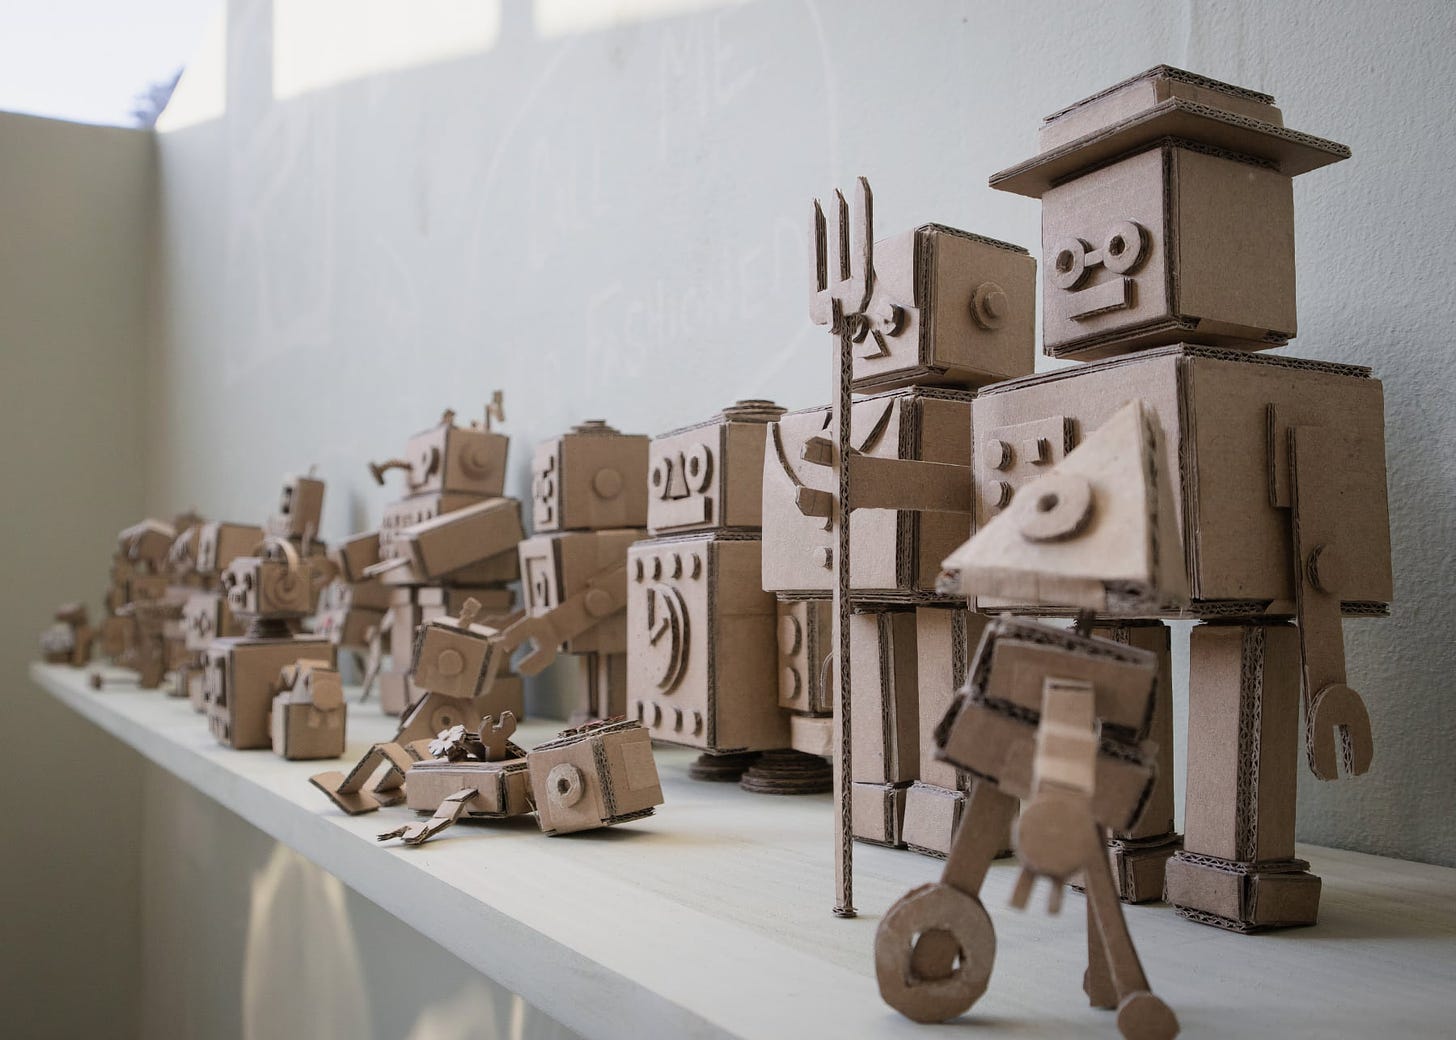  collection of cardboard robots by Beth Edgar displayed at Gray’s Degree Show. The robots are creatively crafted from corrugated cardboard, each with unique shapes and designs. They are arranged on a white shelf against a light wall, with shadows casting gently behind them. The robots vary in size and form, some resembling humanoid figures while others take on more abstract or mechanical shapes. The art installation showcases a playful and inventive use of recycled materials to create an assembly of robot figures.